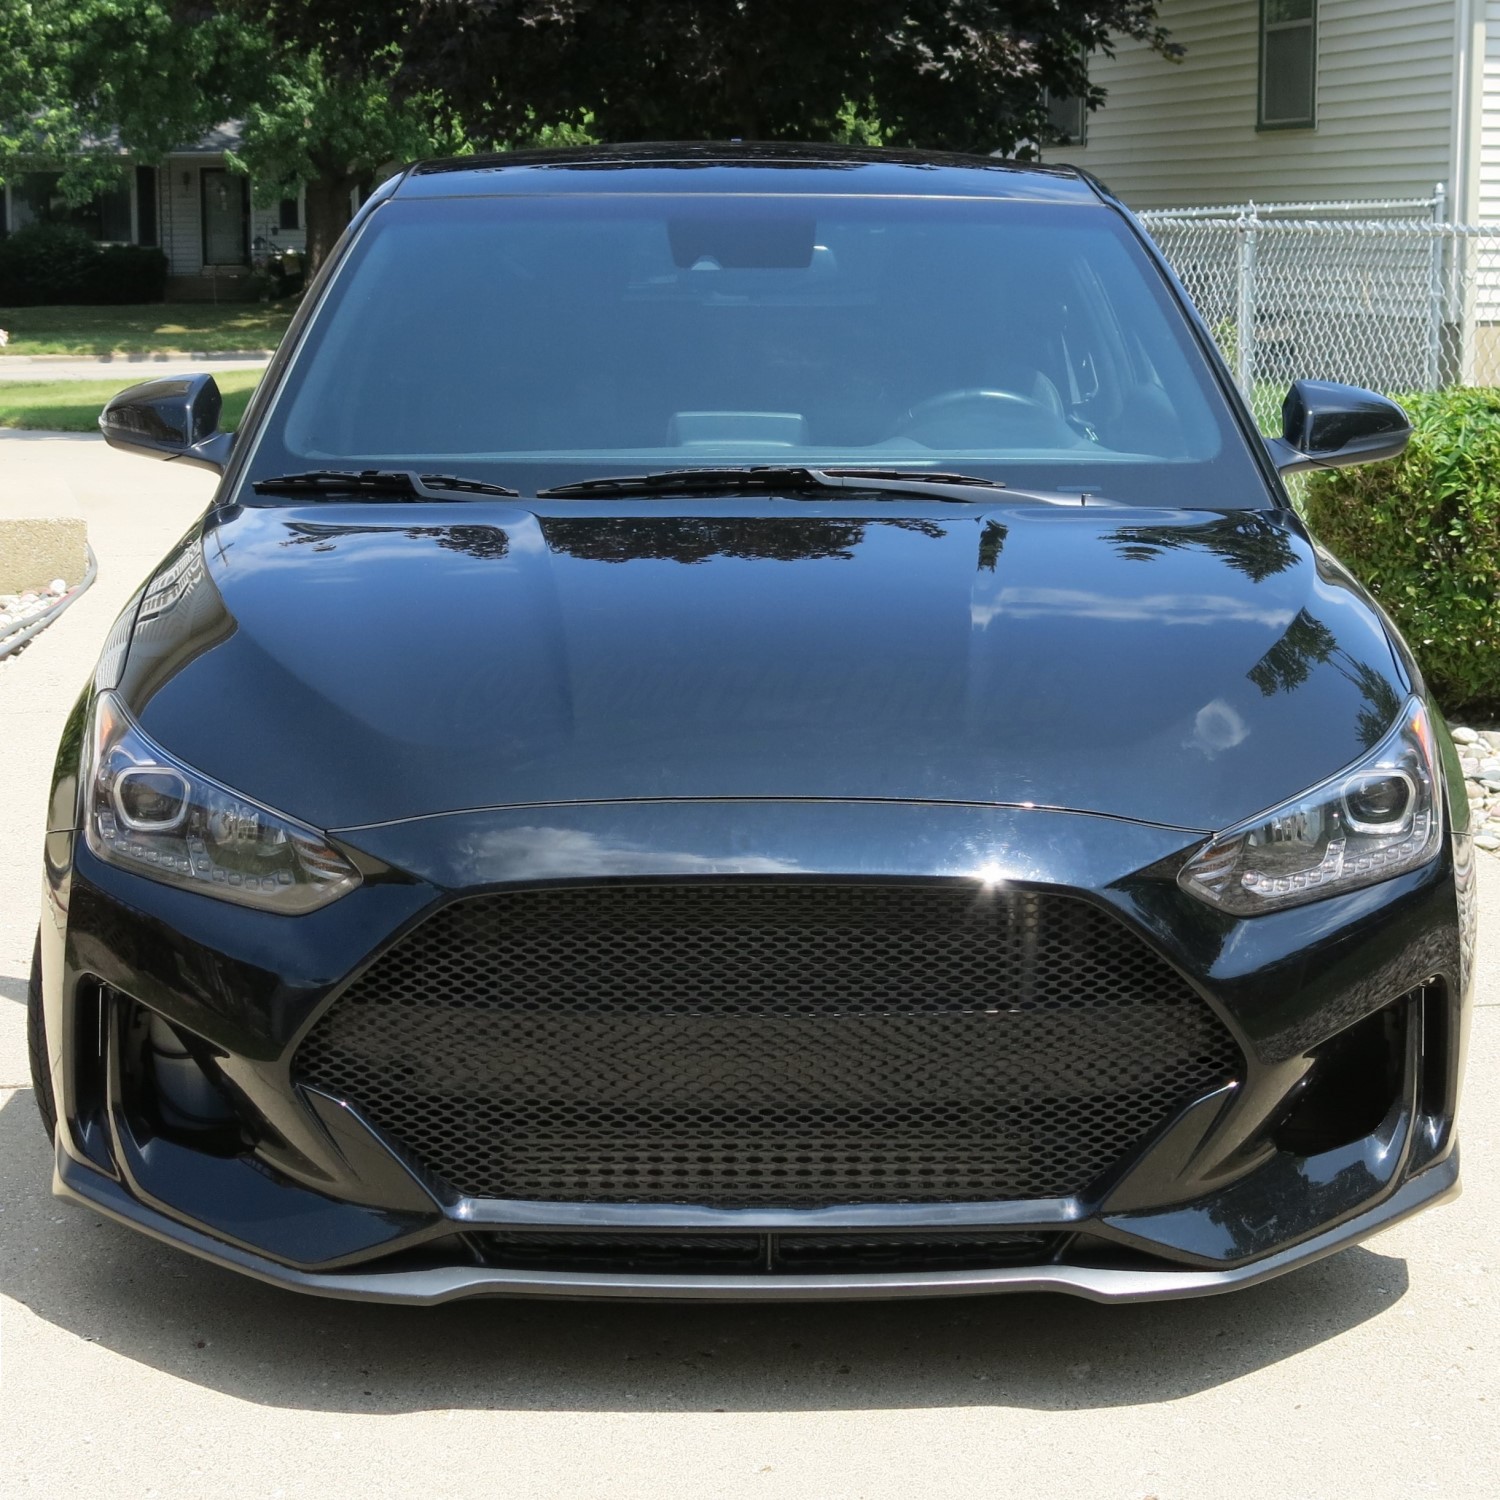 The Wait is Over: 2019 Hyundai Veloster's Sleek New Black Mesh Grille